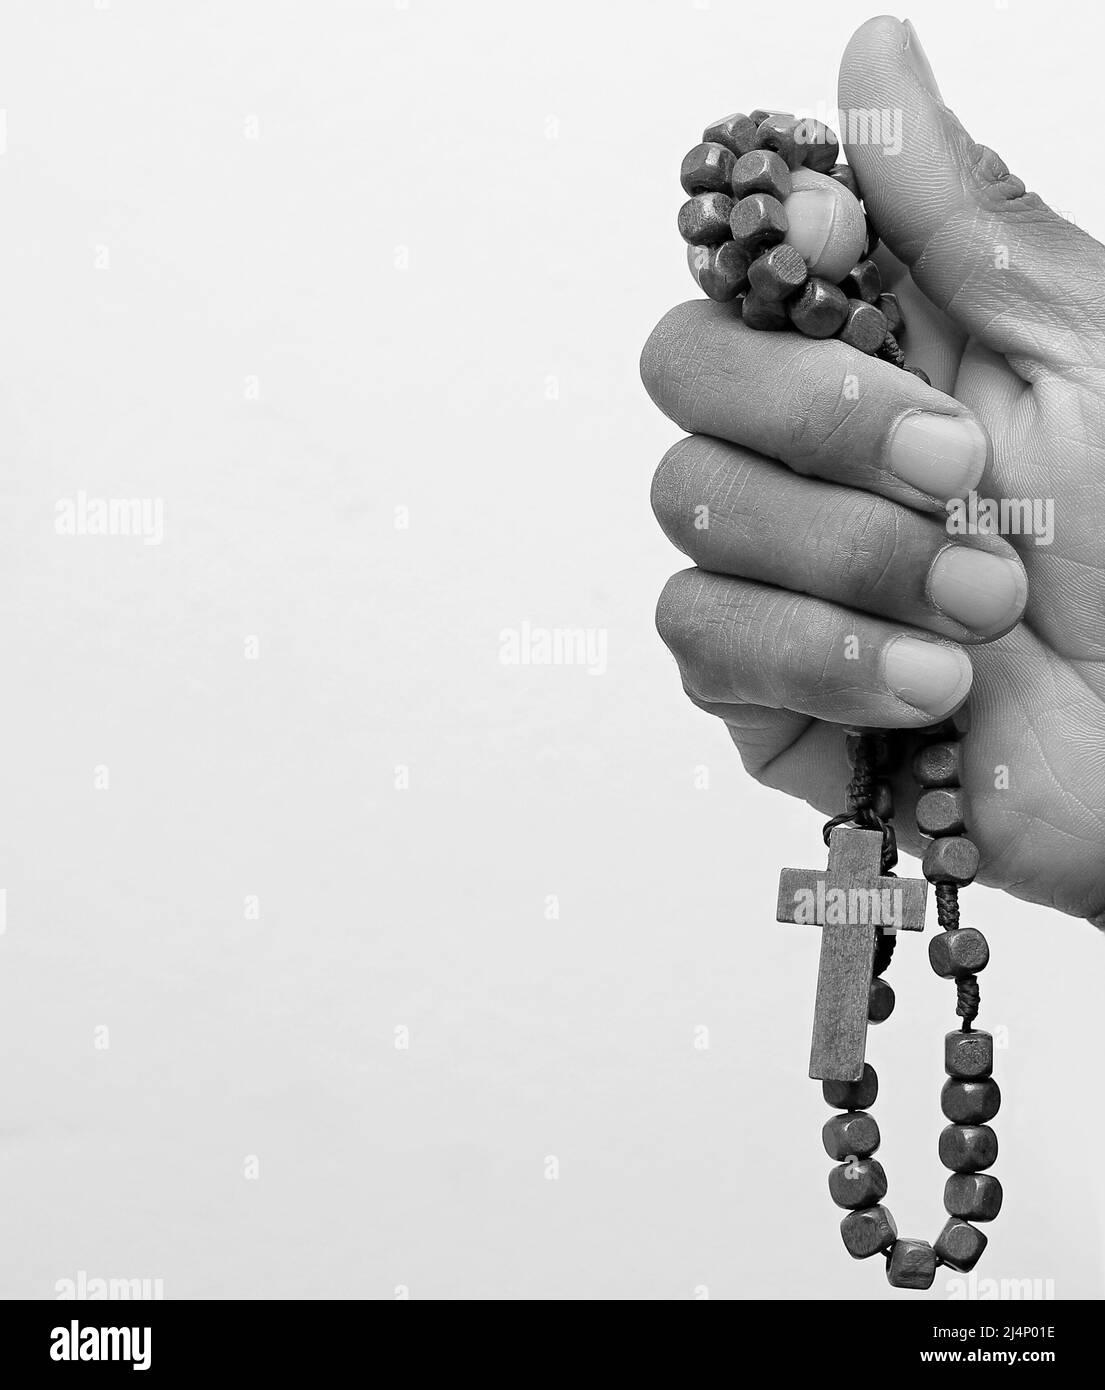 praying to god on gray background with people stock image stock photo Stock Photo